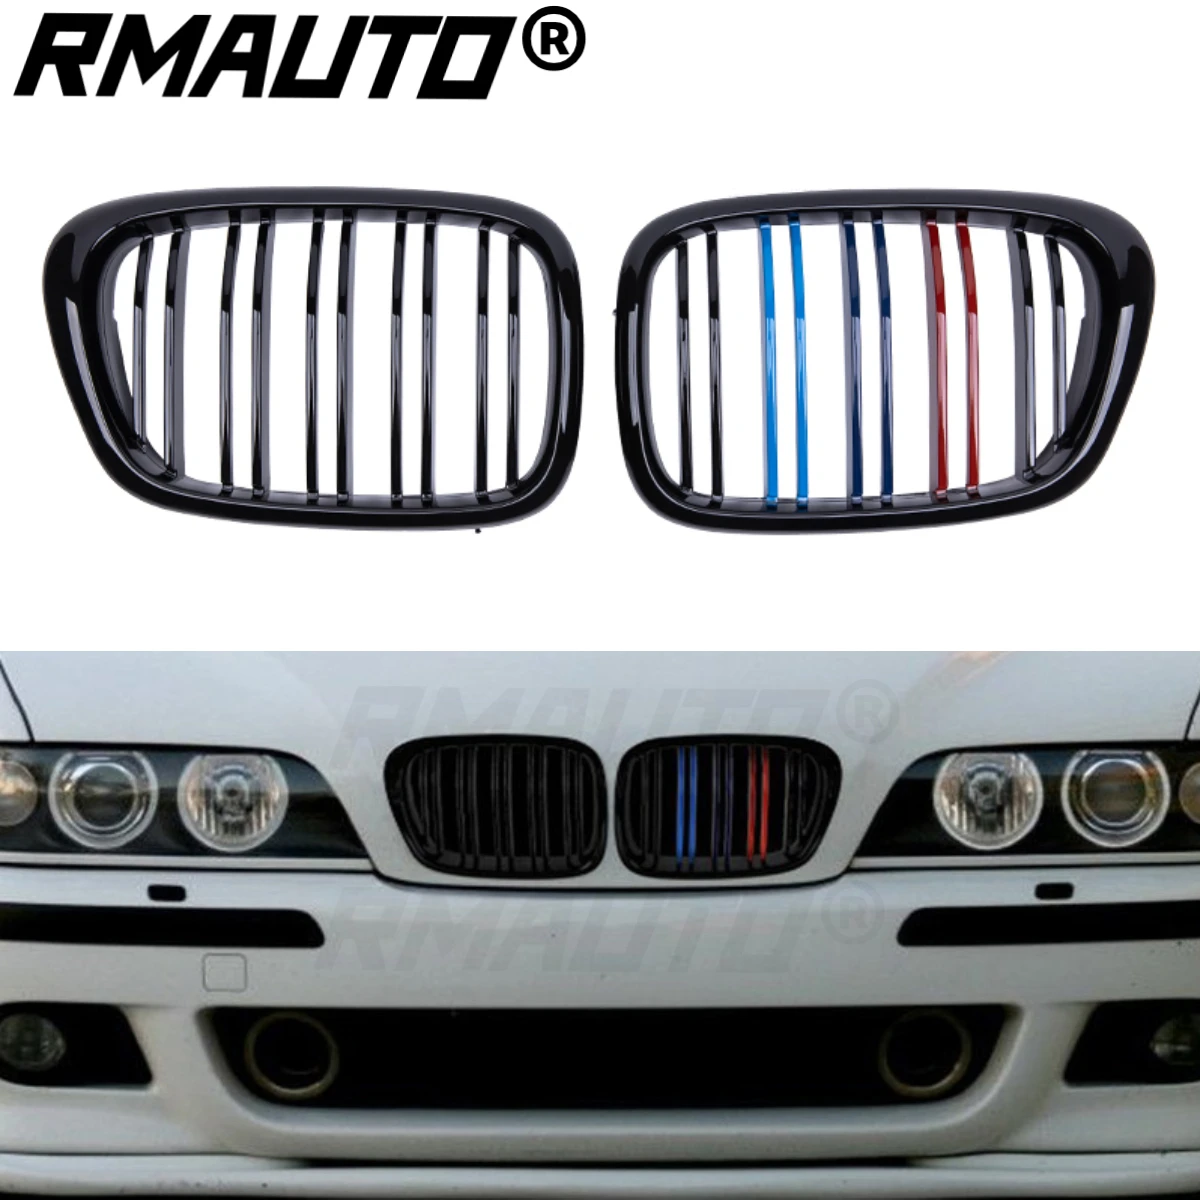 

RMAUTO M Style Car Front Bumper Kidney Grille Racing Grill Glossy Black For BMW E39 5 Series 1997-2003 Car Body Styling Kit